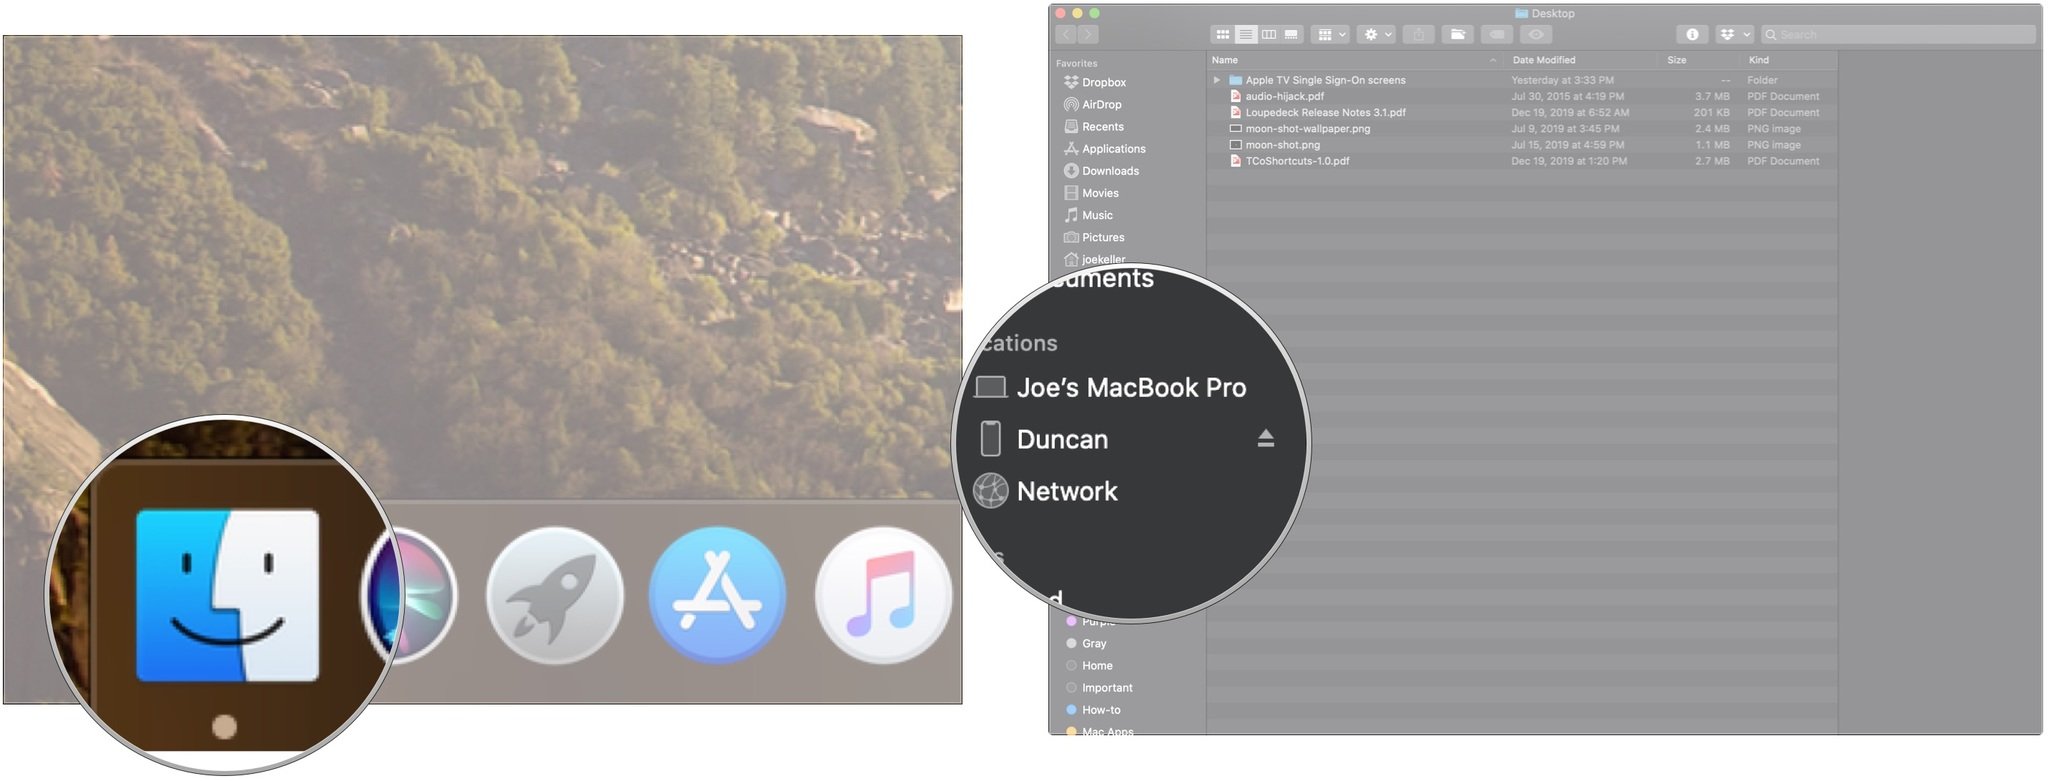 Back up your iPhone on macOS Catalina, showing how to click Finder, then click device